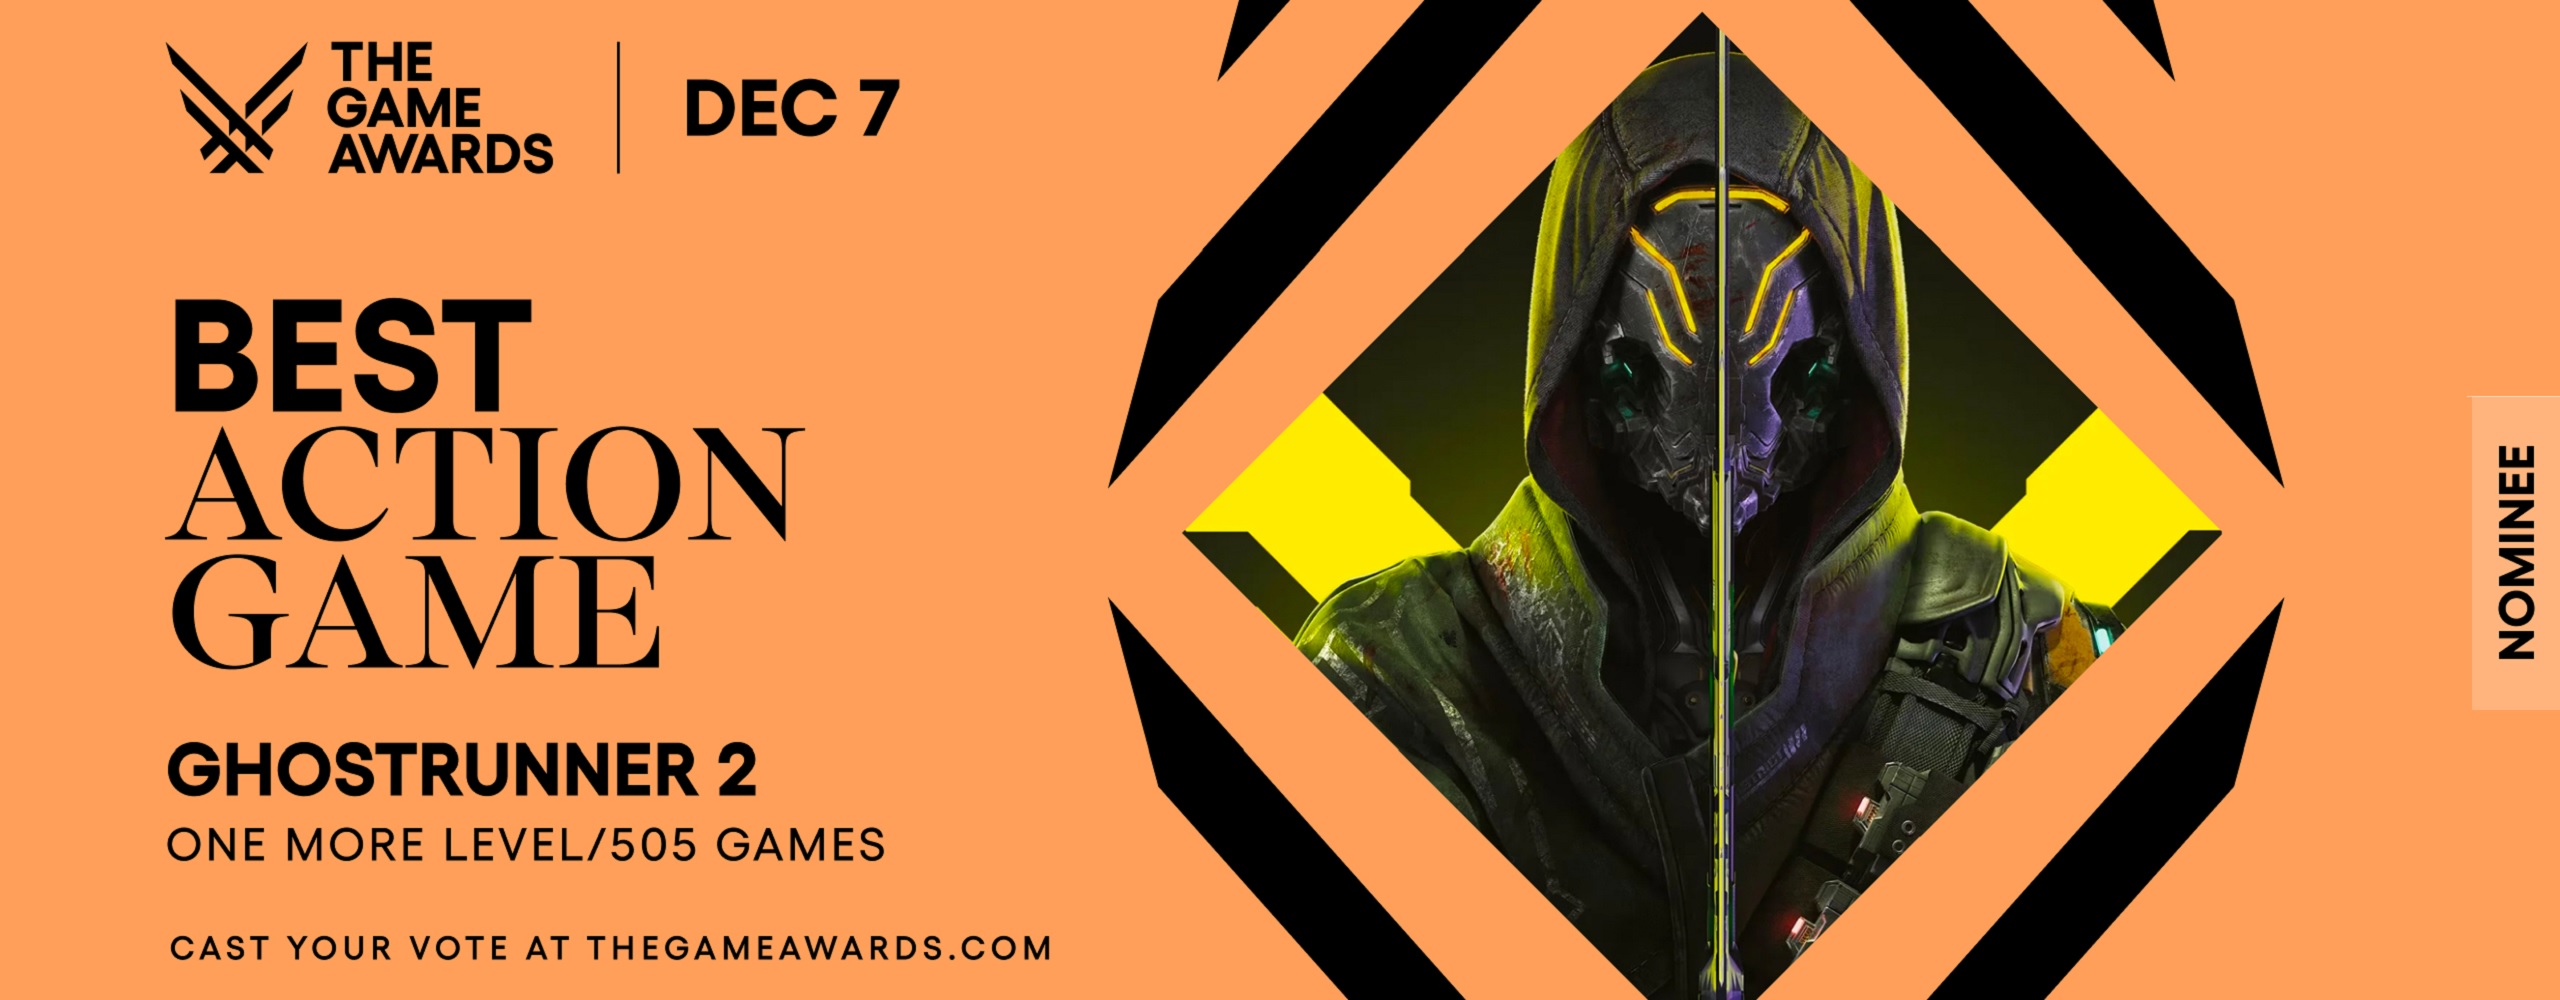 Ghostrunner 2 Nominated for Best Action Game at The Game Awards